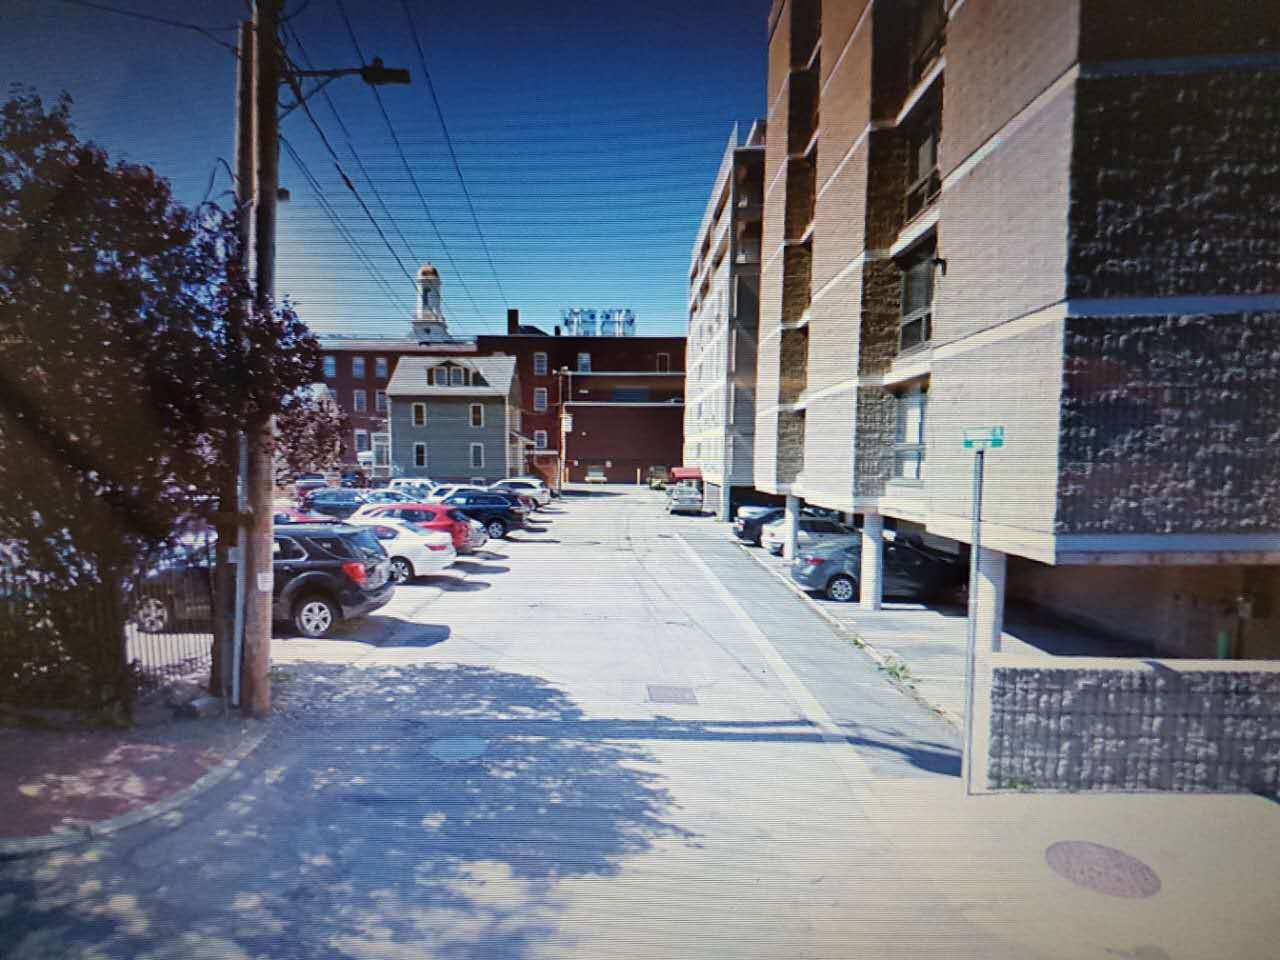 Parking, Garages And Car Spaces For Rent - Month To Month Undercover Safe Spot Near Broadway